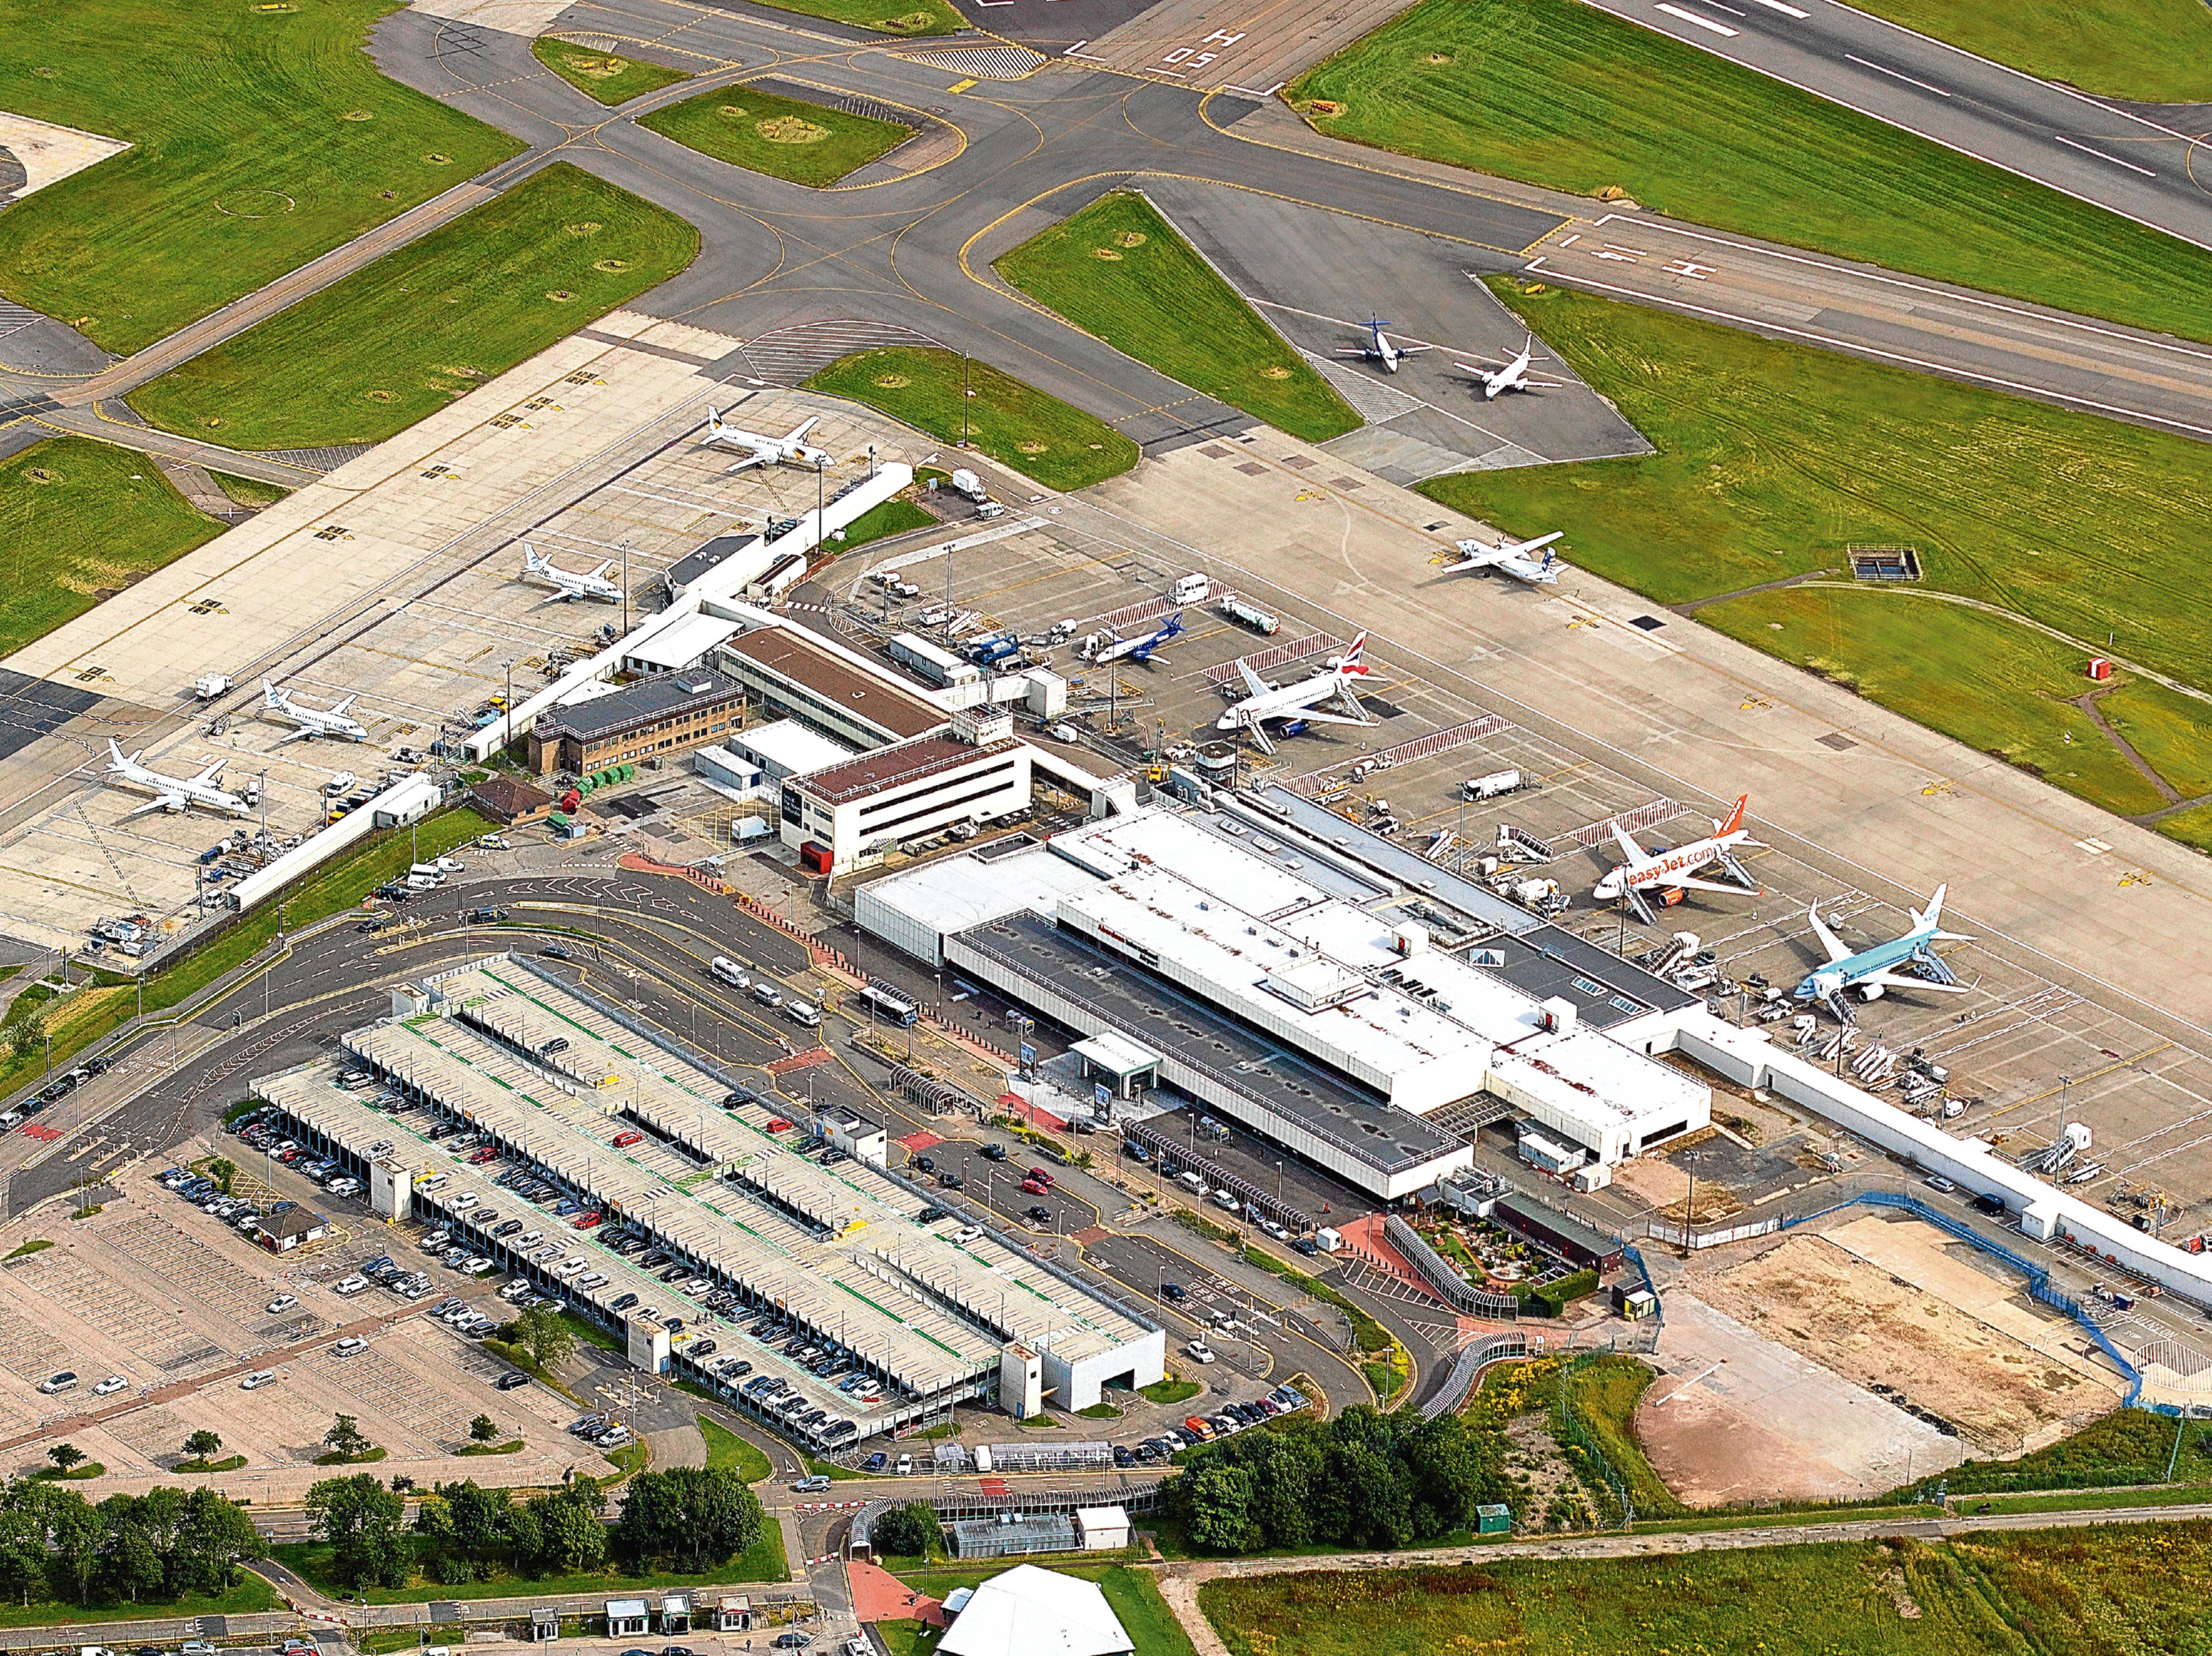 The developers plan to build hundreds of council homes near Aberdeen International Airport.